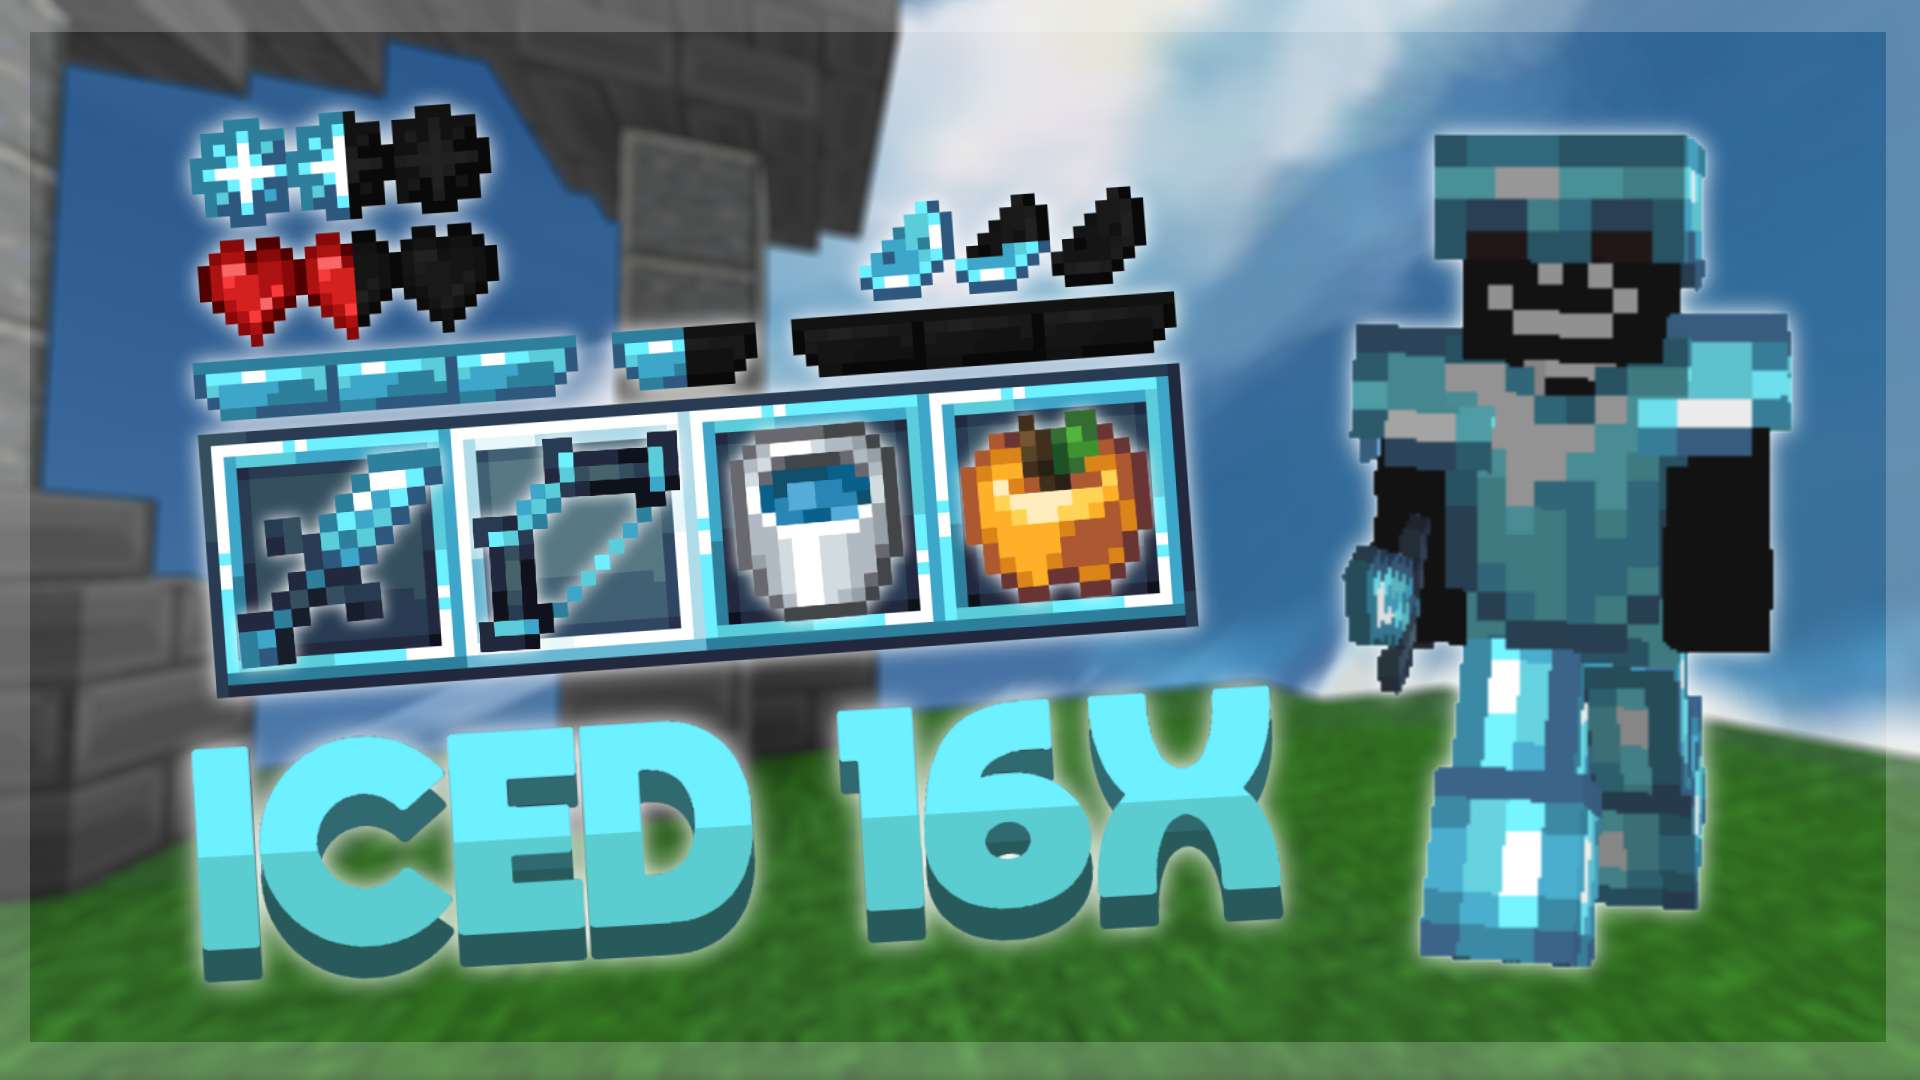 Iced  16x by Bedwur & Rh56 on PvPRP